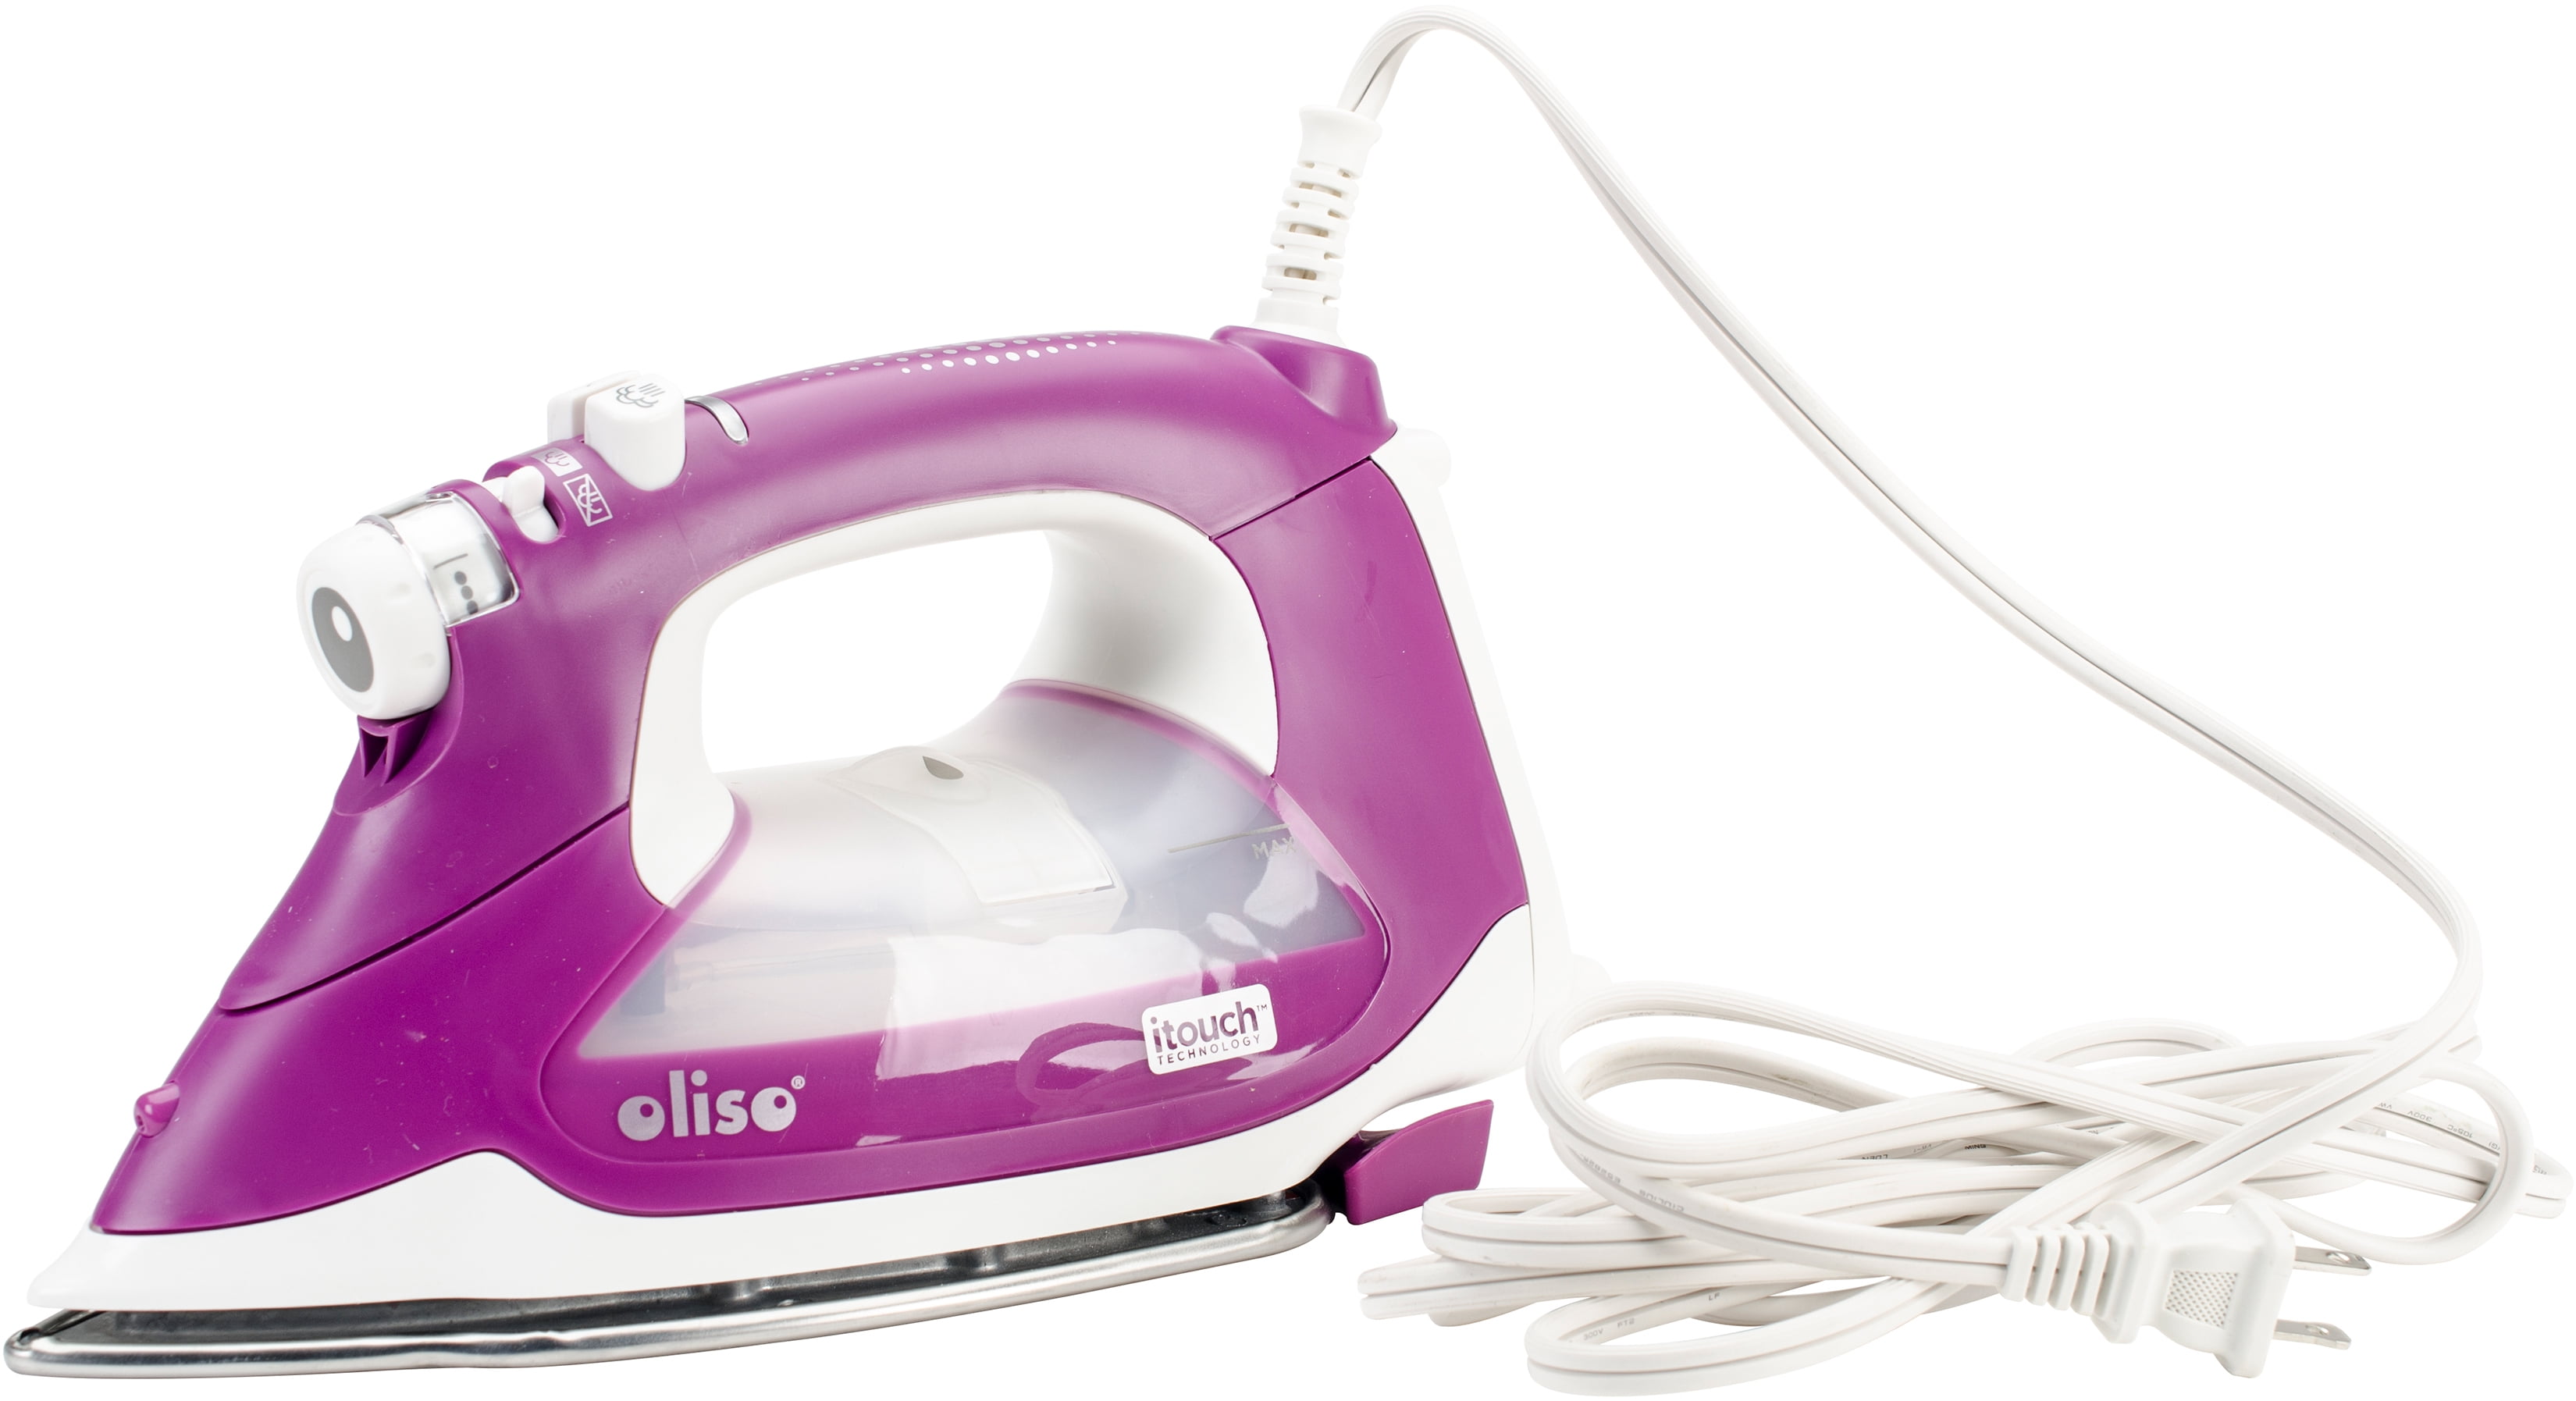 Product Review: Oliso Smart Iron — String & Story